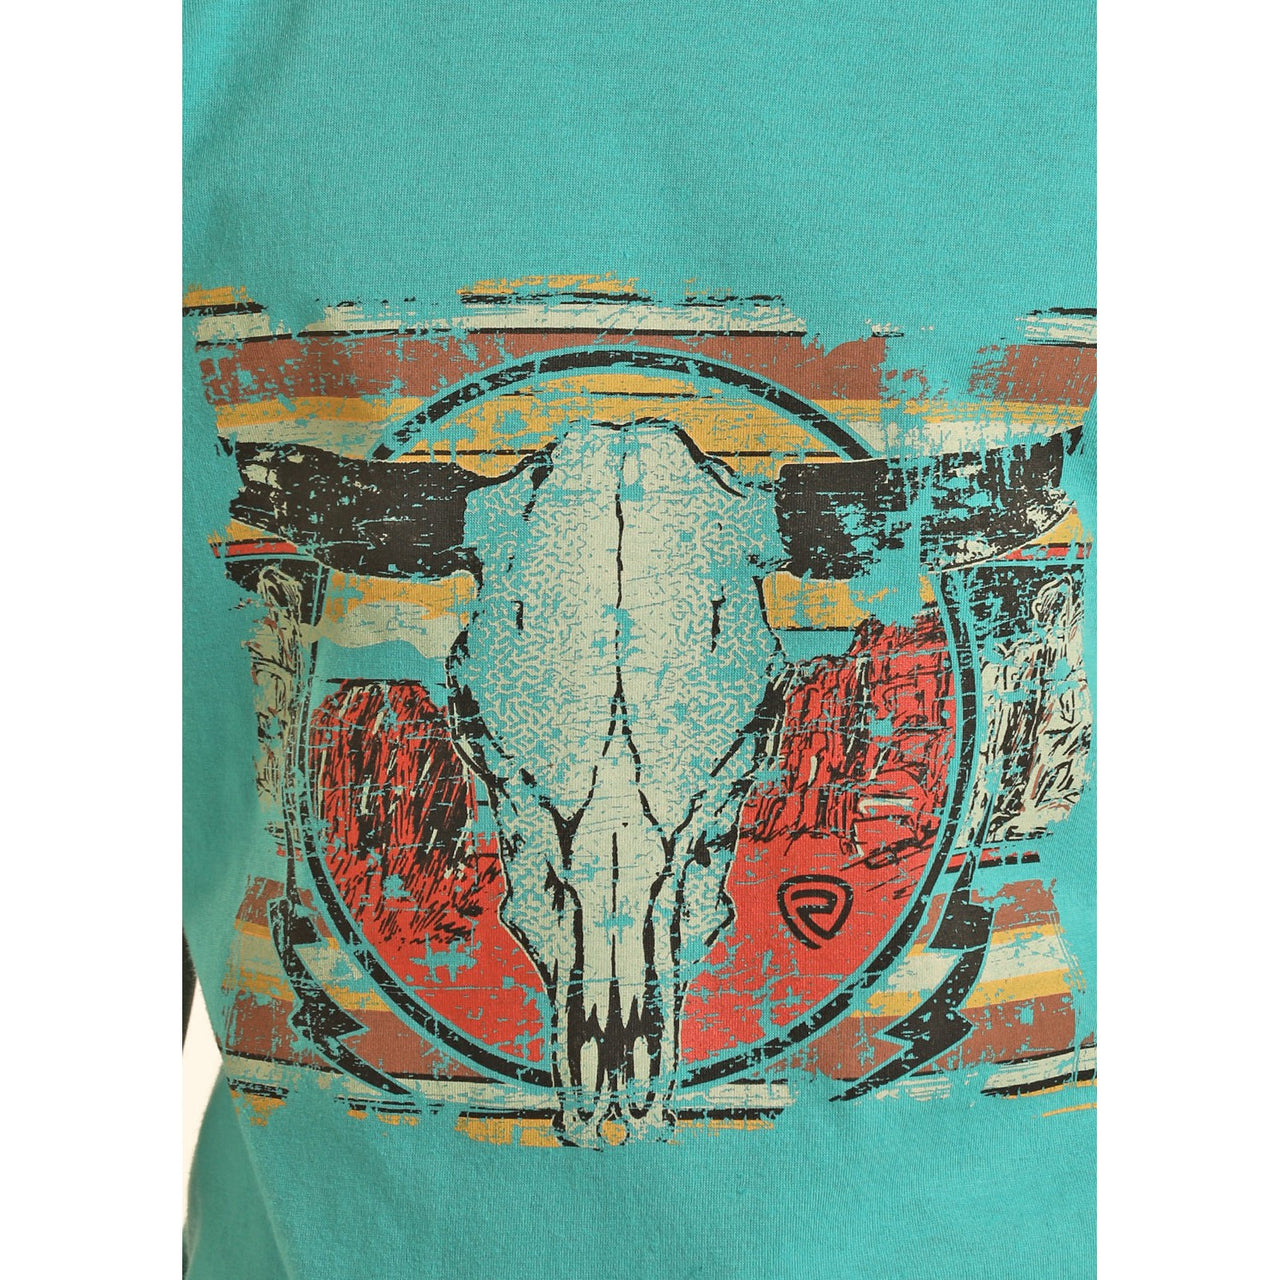 Rock & Roll Boy's Graphic Tee - Turquoise